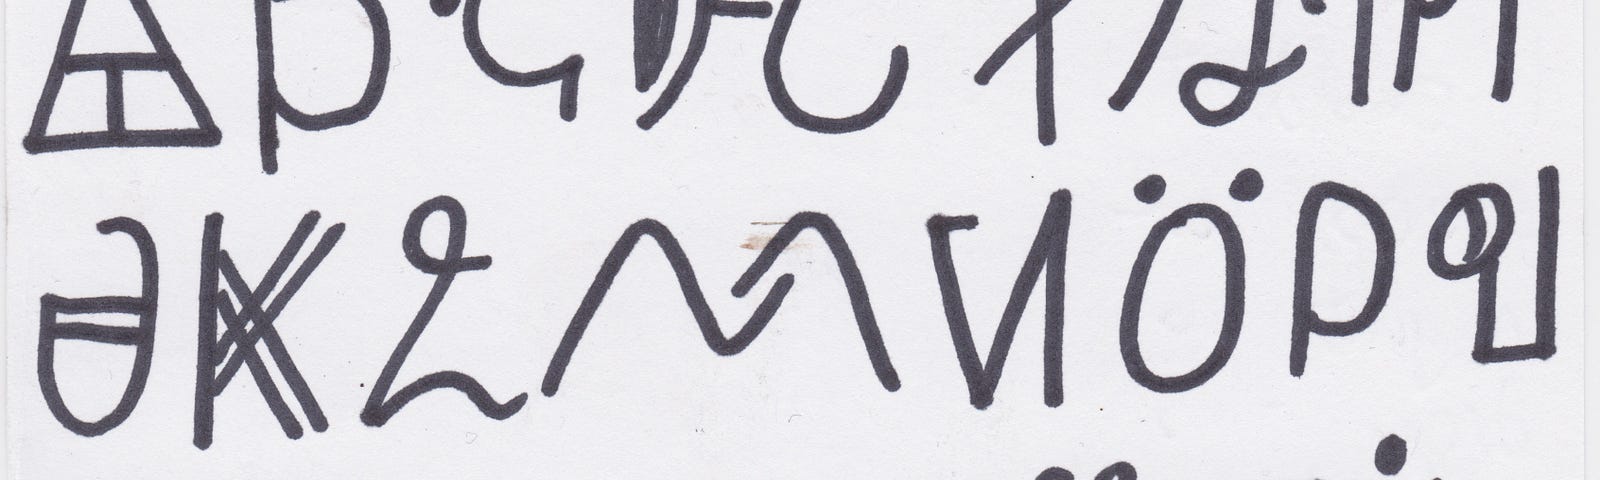 Black sharpie pen written on white thin postcard, running through the alphabet from A in the top left, to Z bottom right.